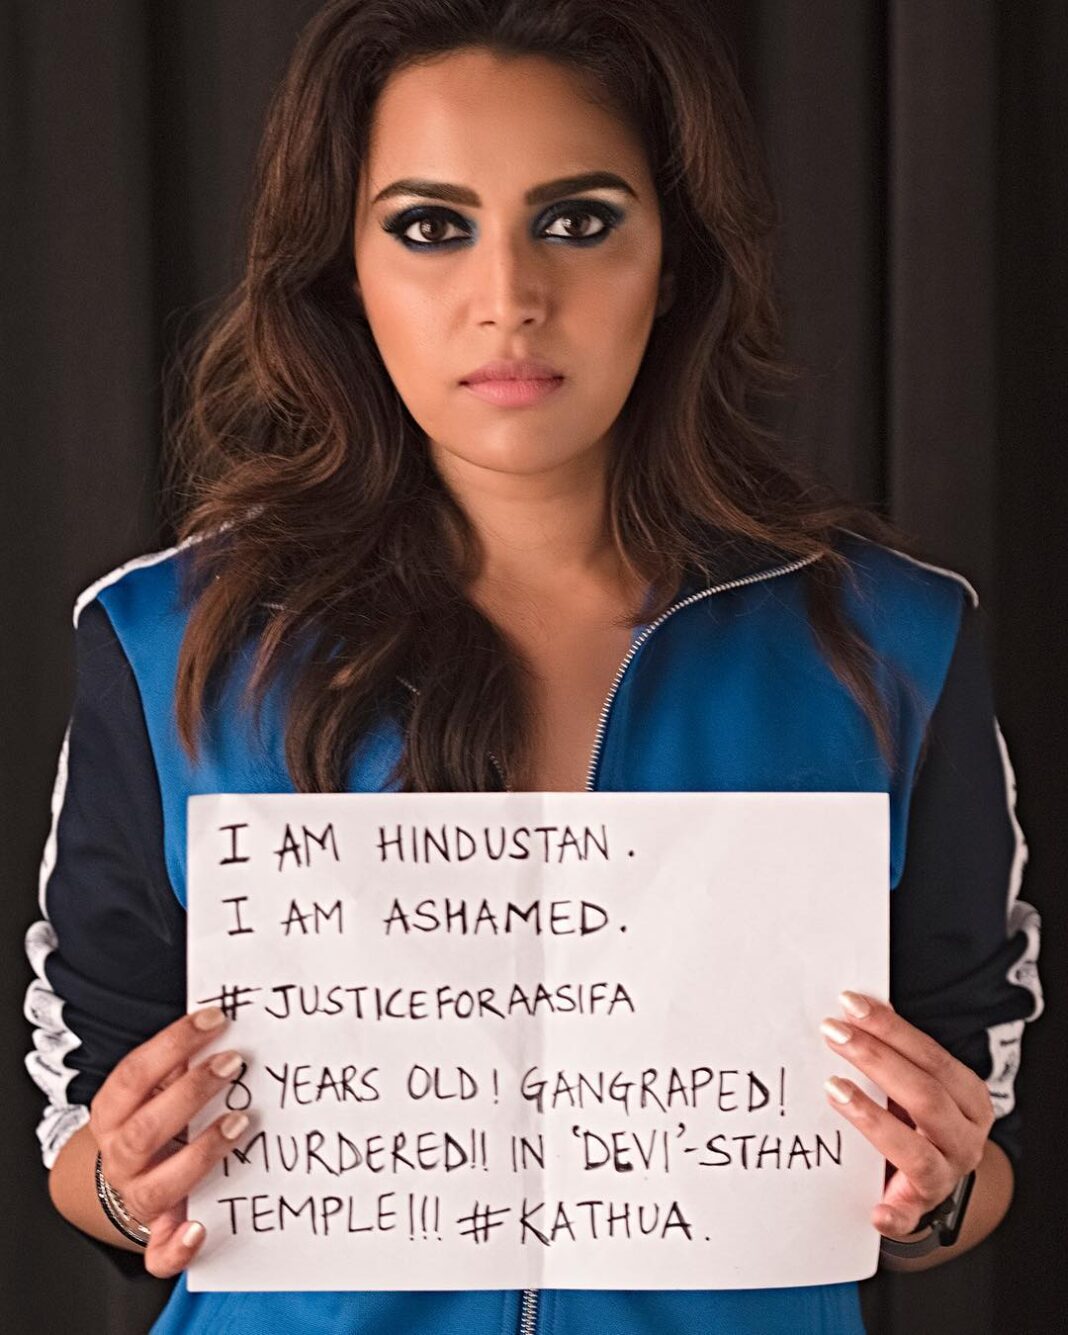 Swara Bhaskar Instagram - I am Hindustan. I am Ashamed. #JusticeForOurChild #JusticeForAasifa 8 years old. Gangraped. Murdered. In ‘Devi’-sthaan temple. #Kathua and lest we forget #unnao Shame on us! #BreakTheSilence #EndTheComplicity #ActNow